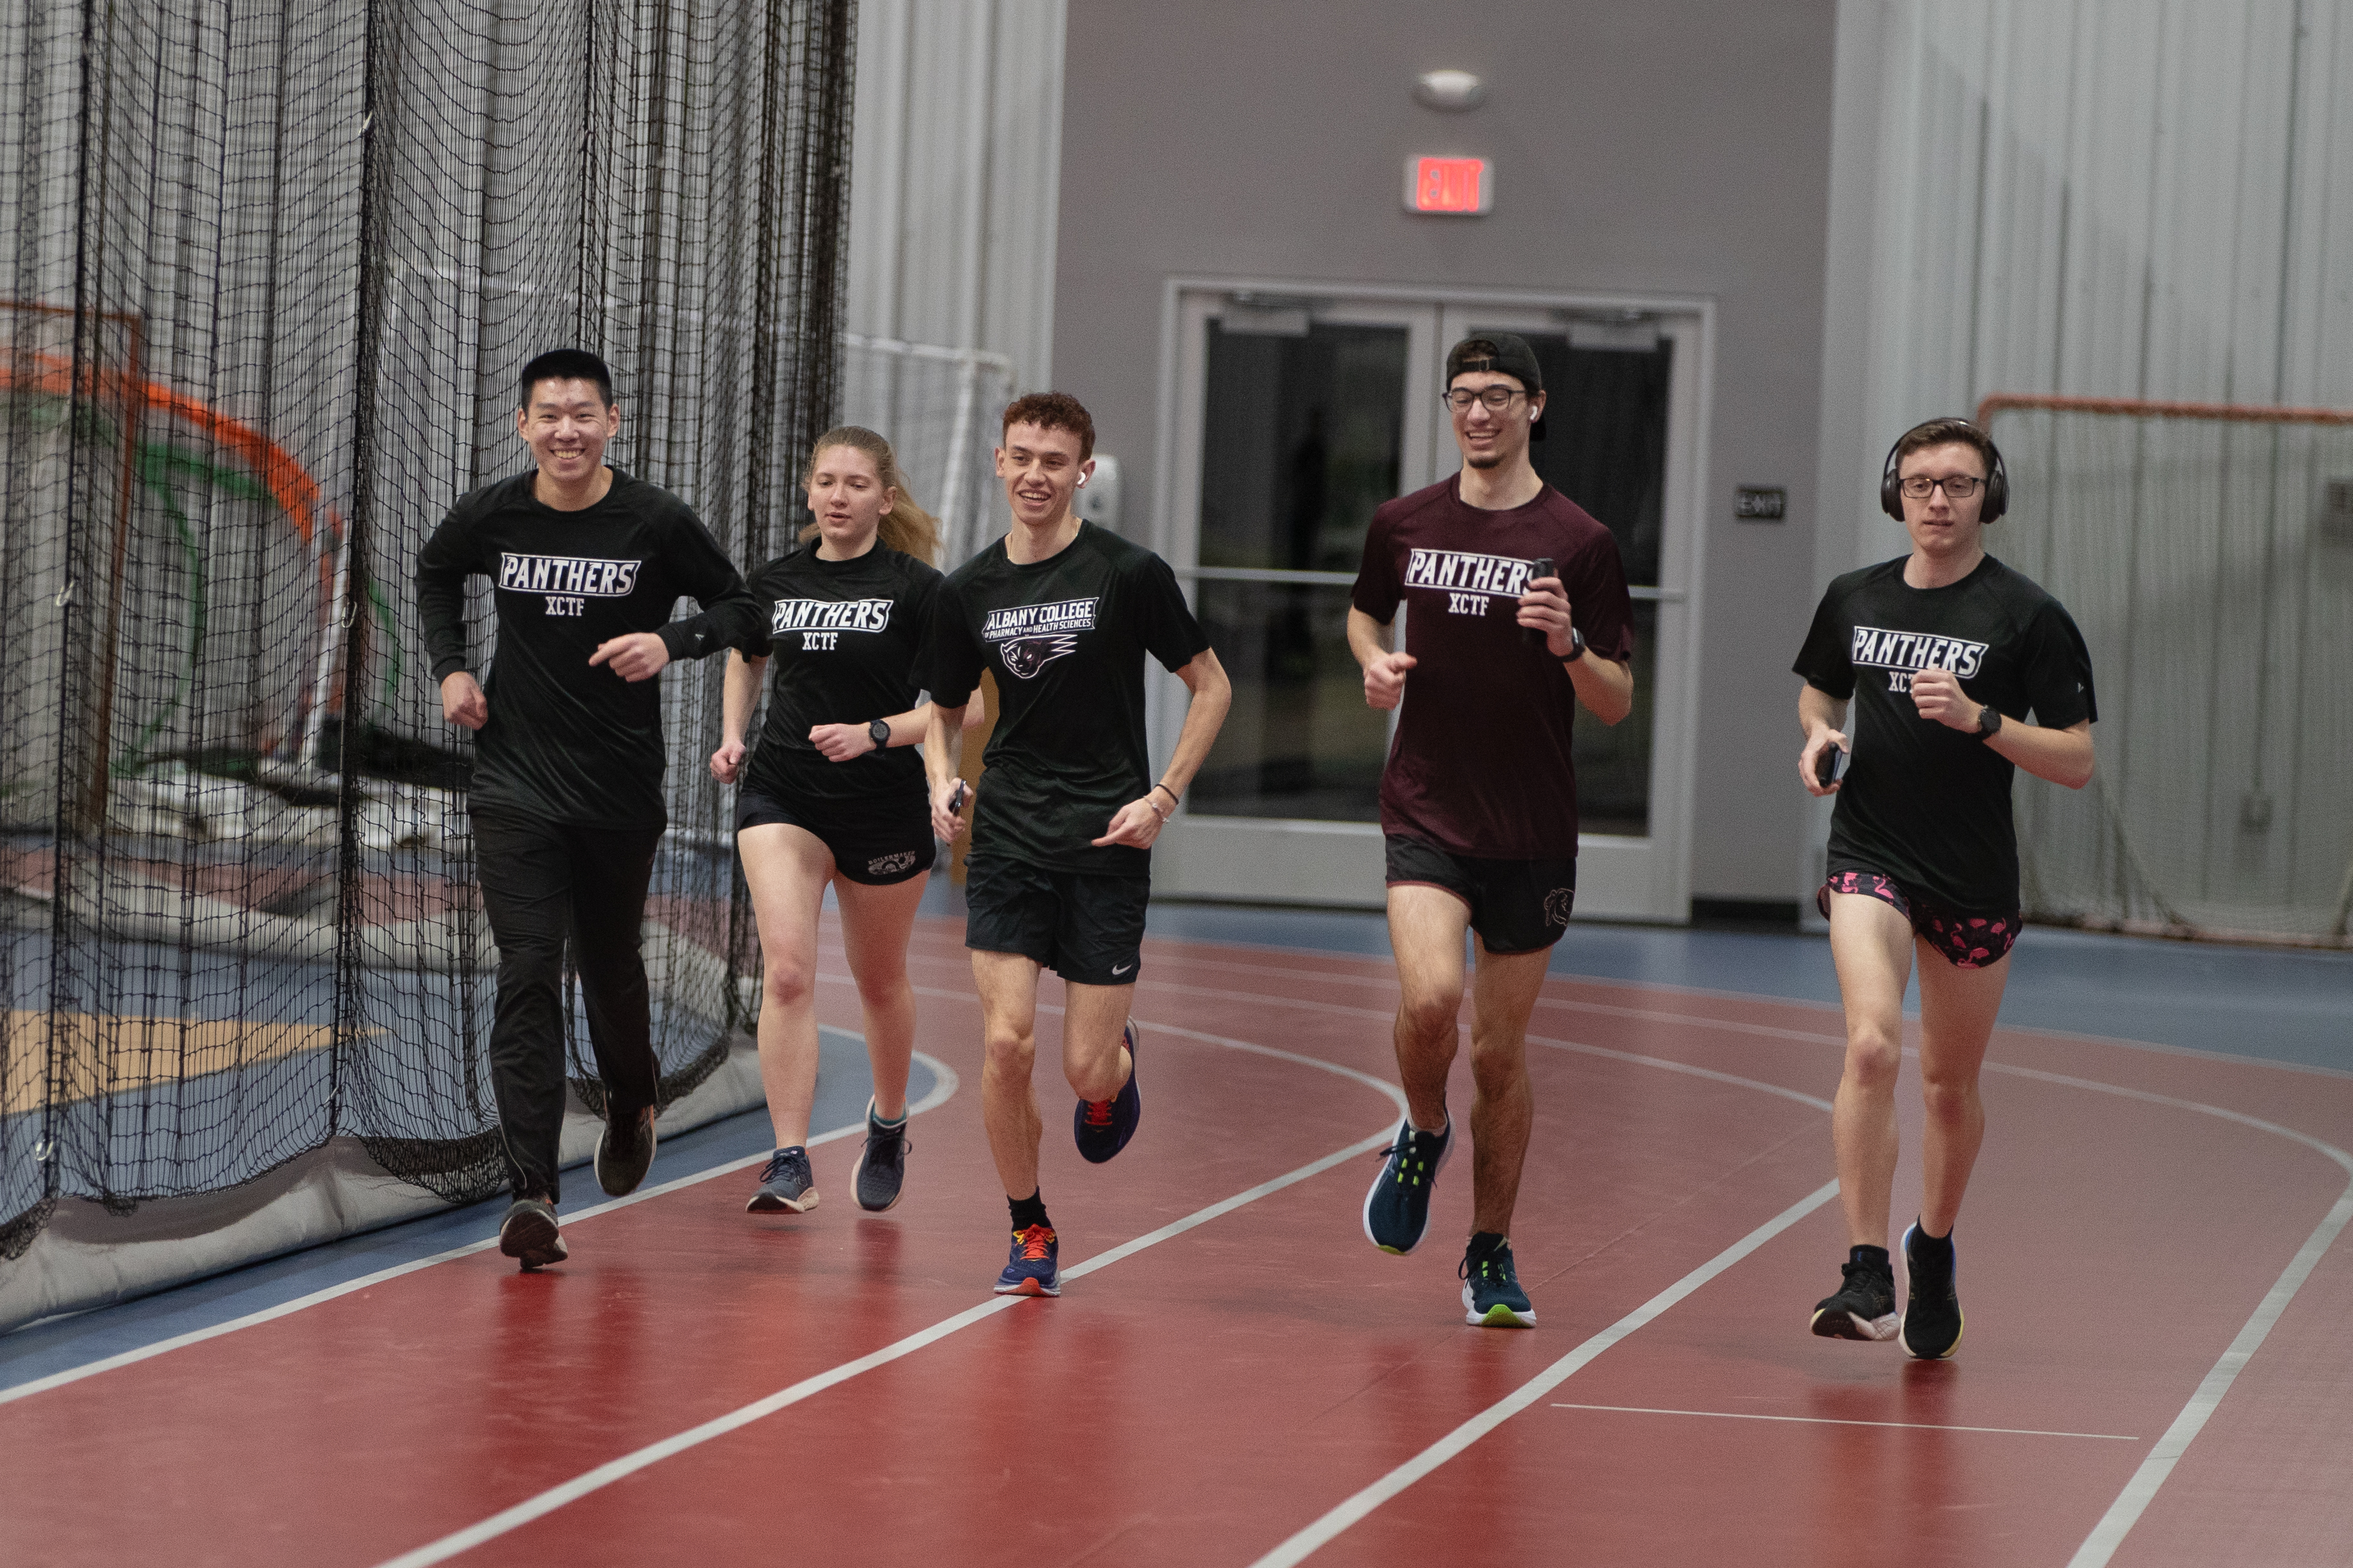 Track and Field team members running on the track at Albany Academy